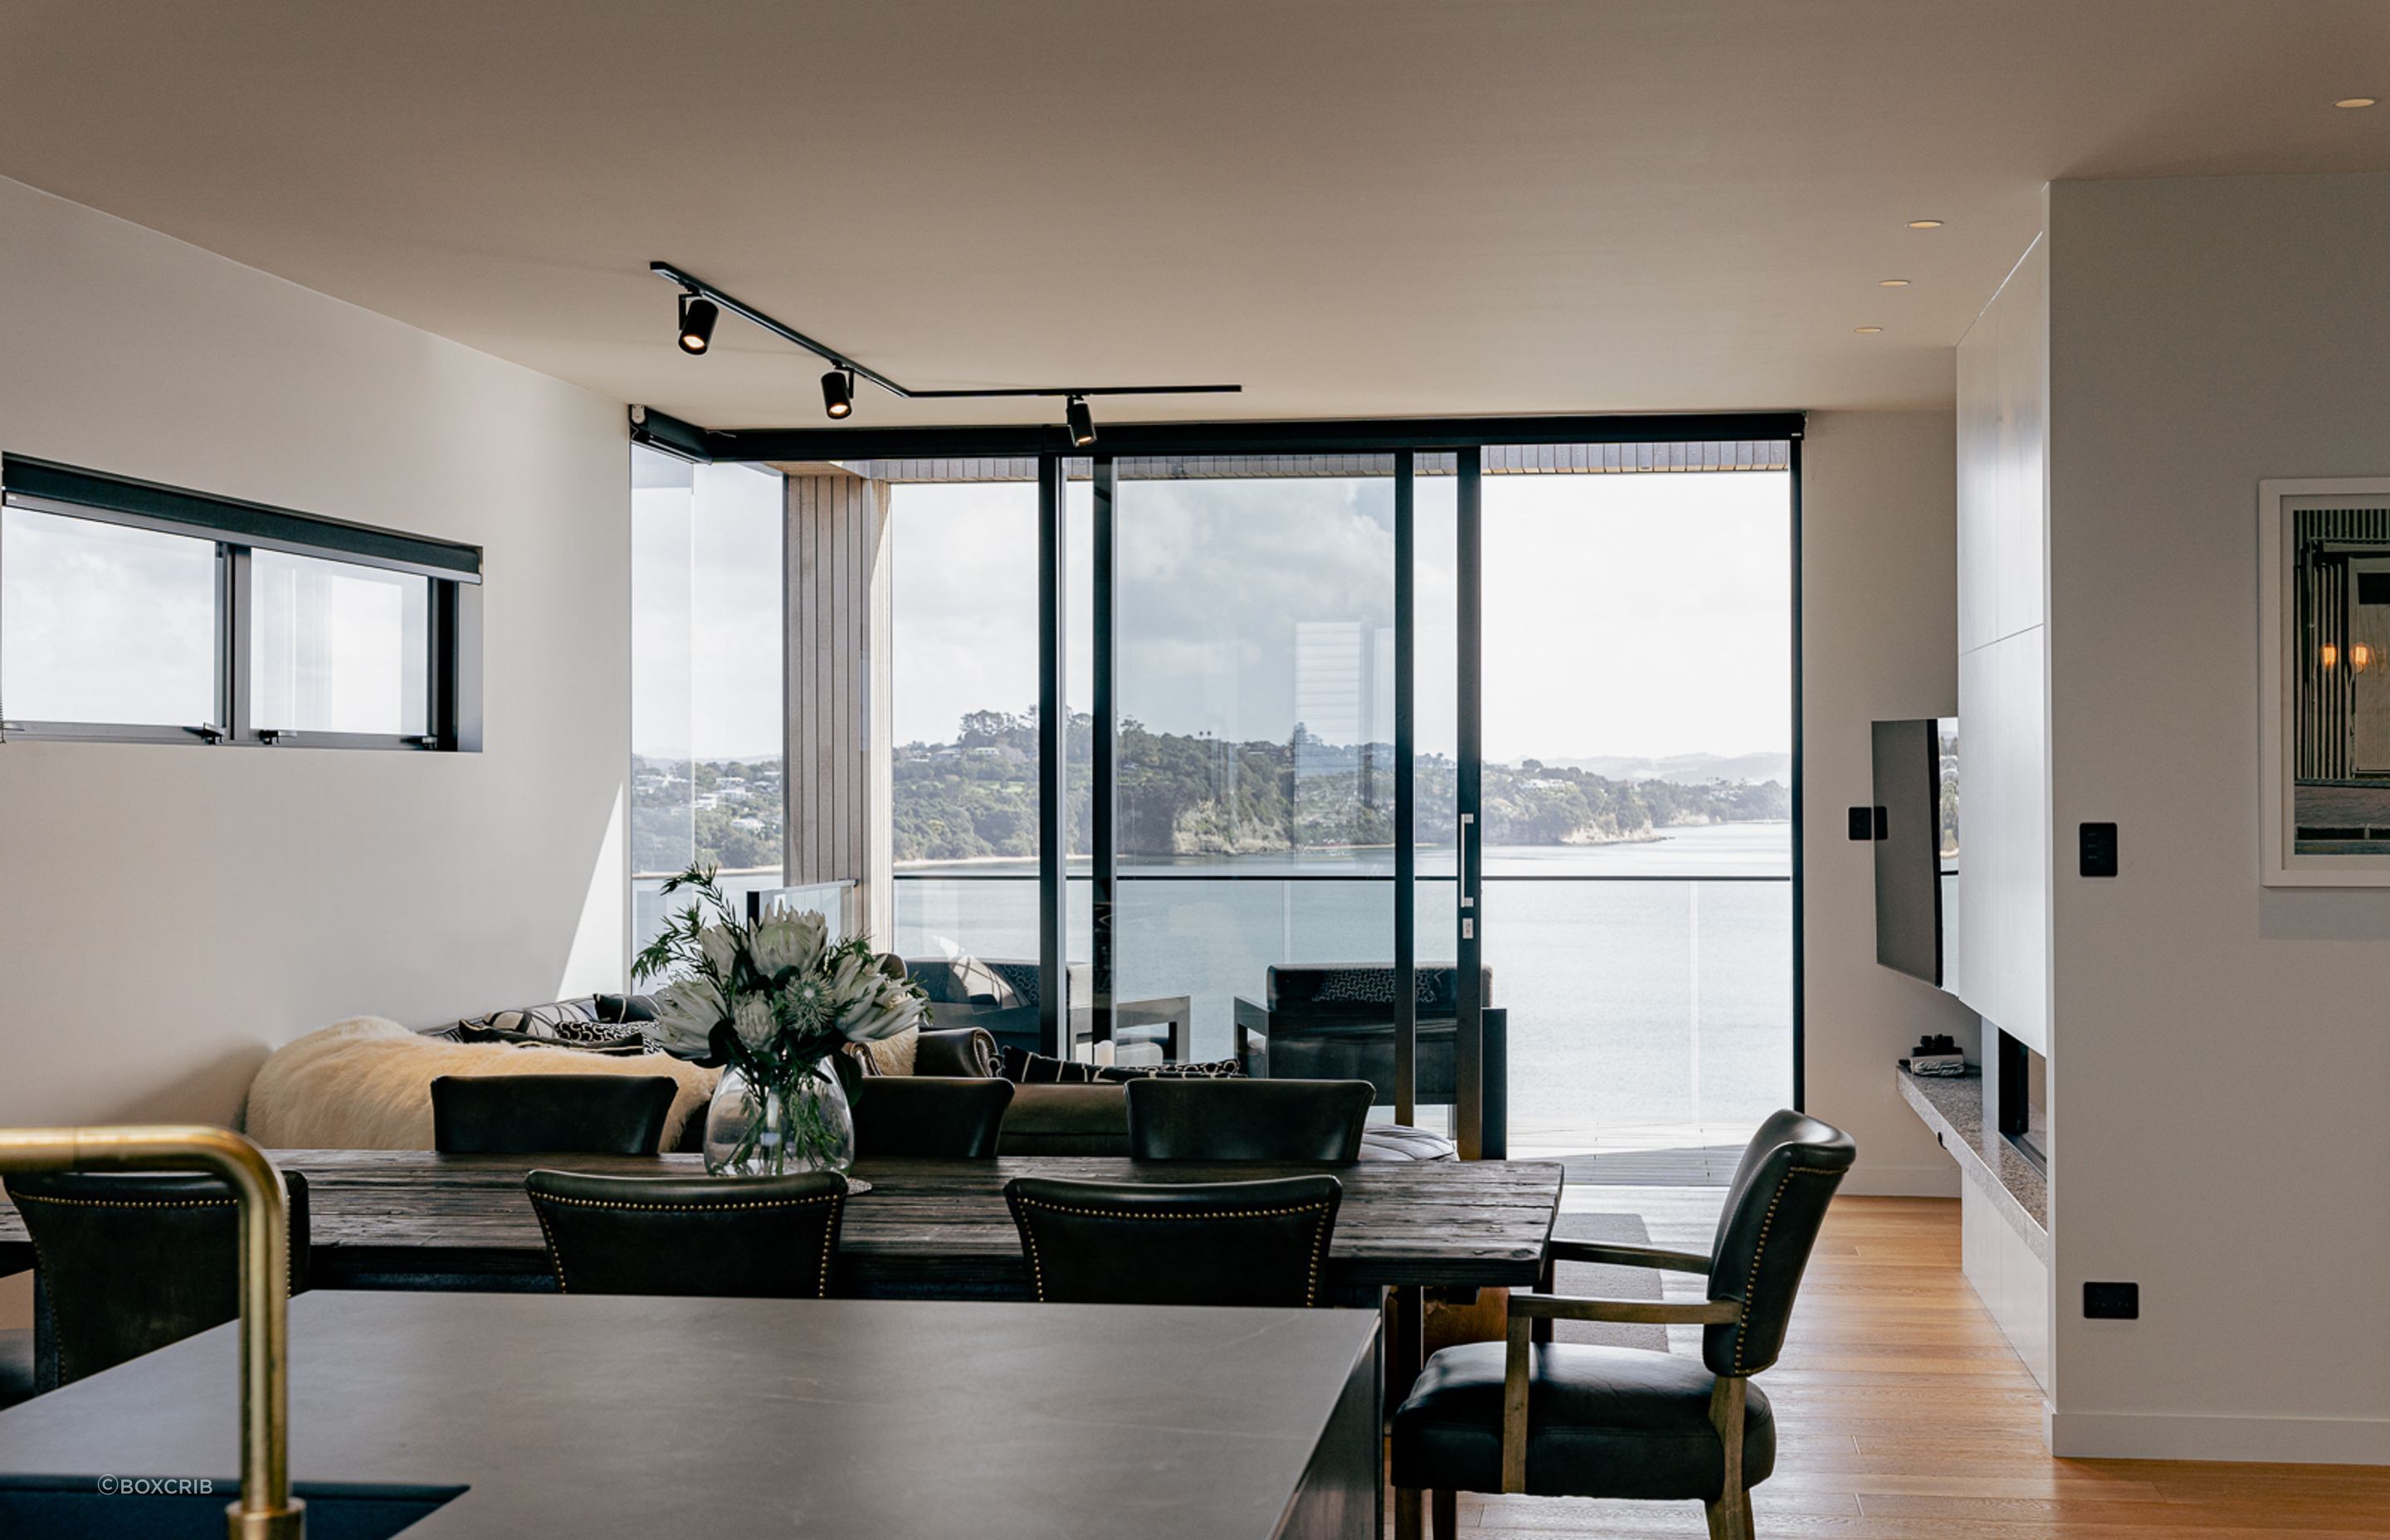 The main living space has floor-to-ceiling windows to make the most of the vista.